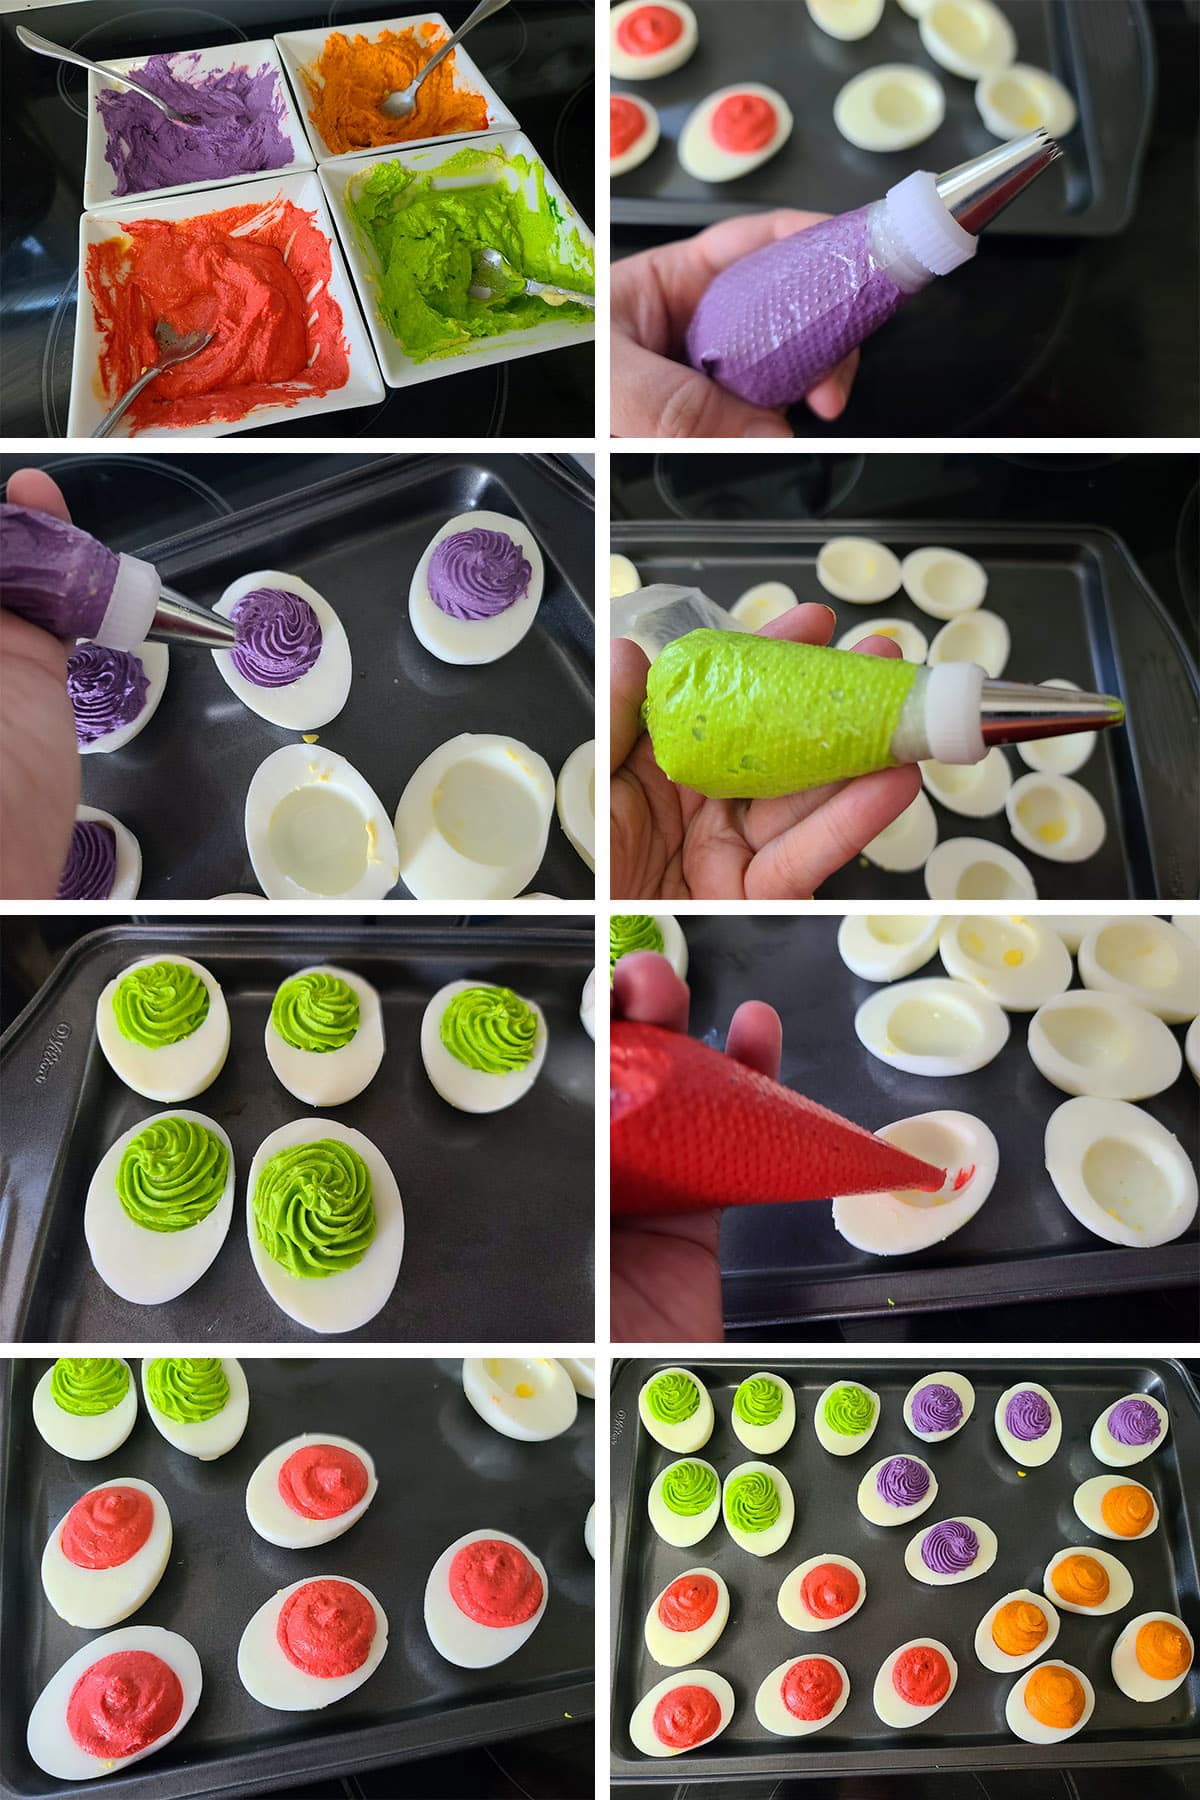 An 8 part image showing the different fillings being piped into egg white halves.